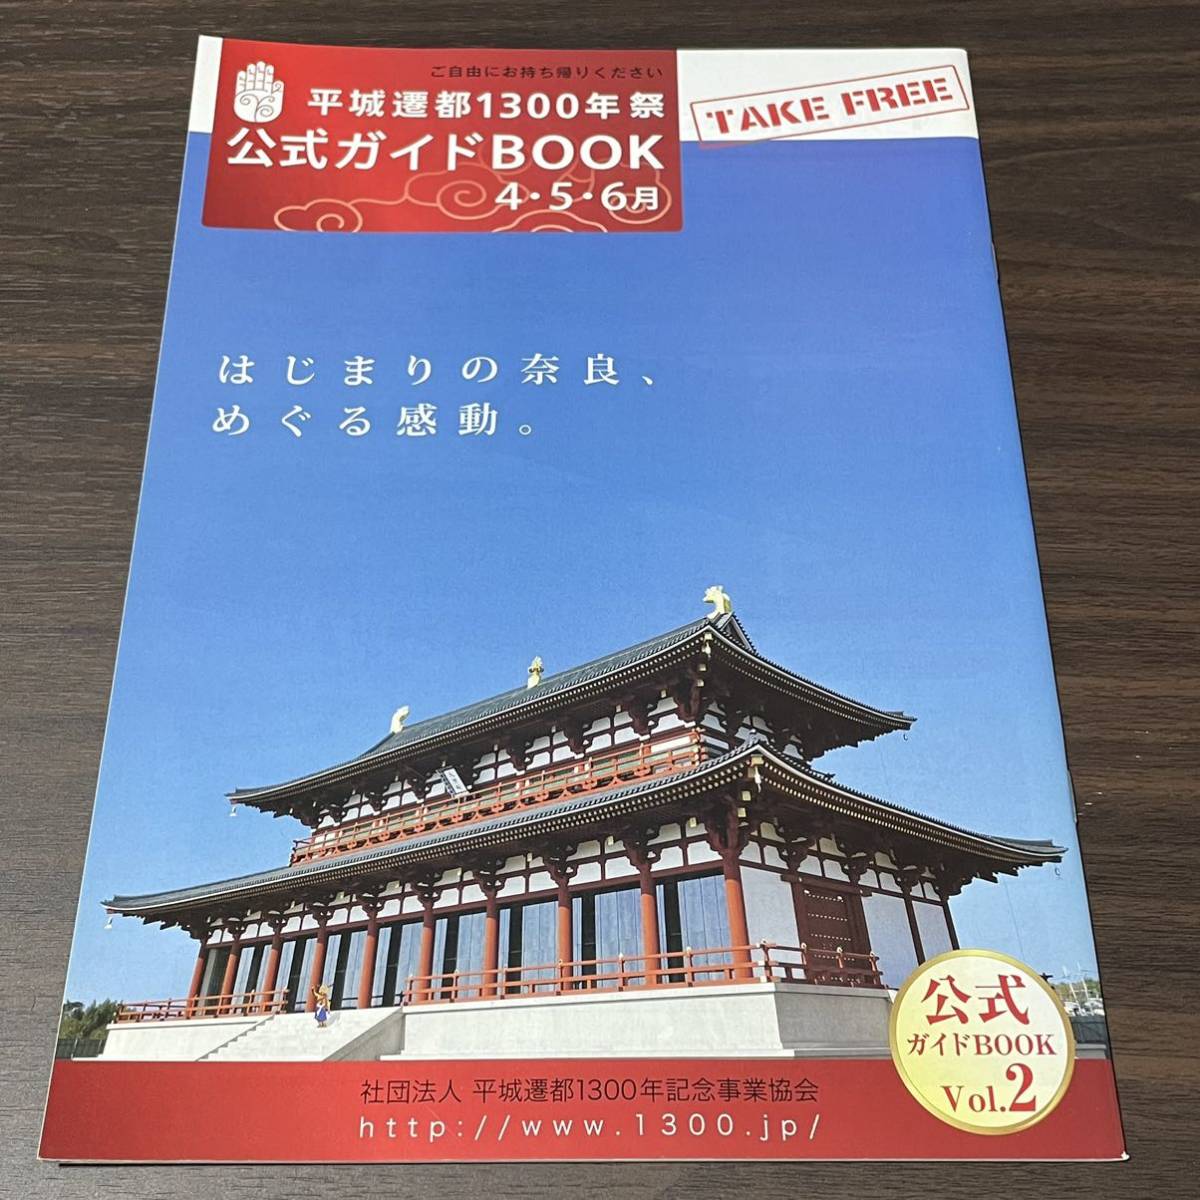 [ flat castle . capital 1300 year festival official guide BOOK]Vol.1~4 Nara flat castle . trace ... kun sightseeing guide pamphlet 4 pcs. 